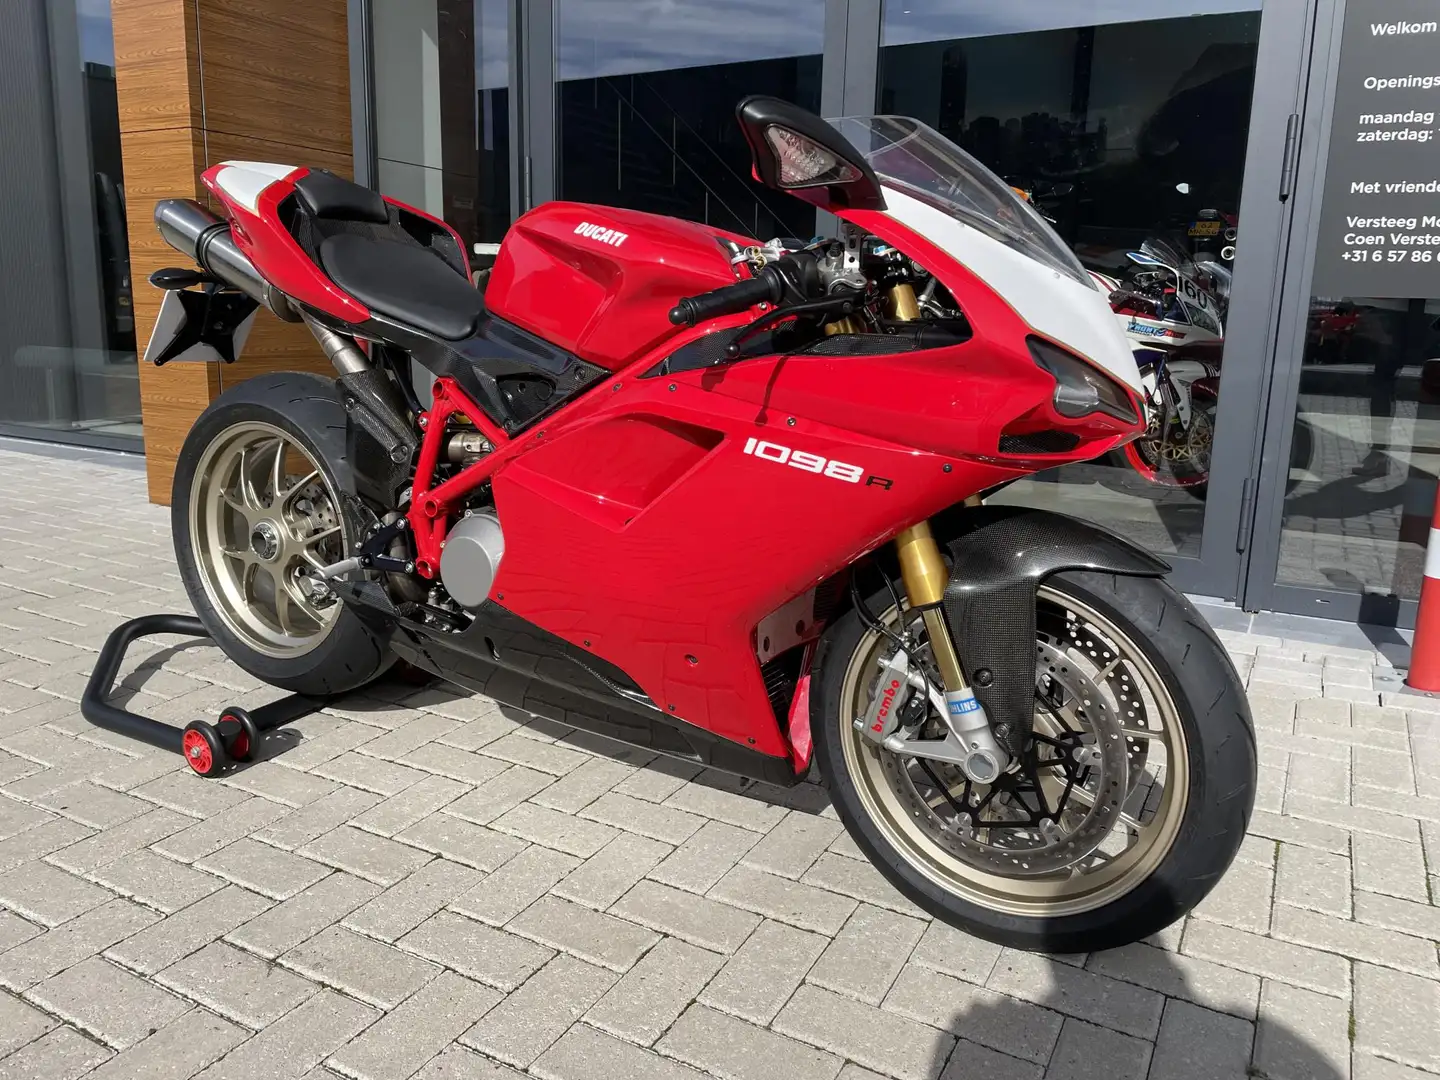 Ducati 1098 R # 1098R # one of a kind Red - 2